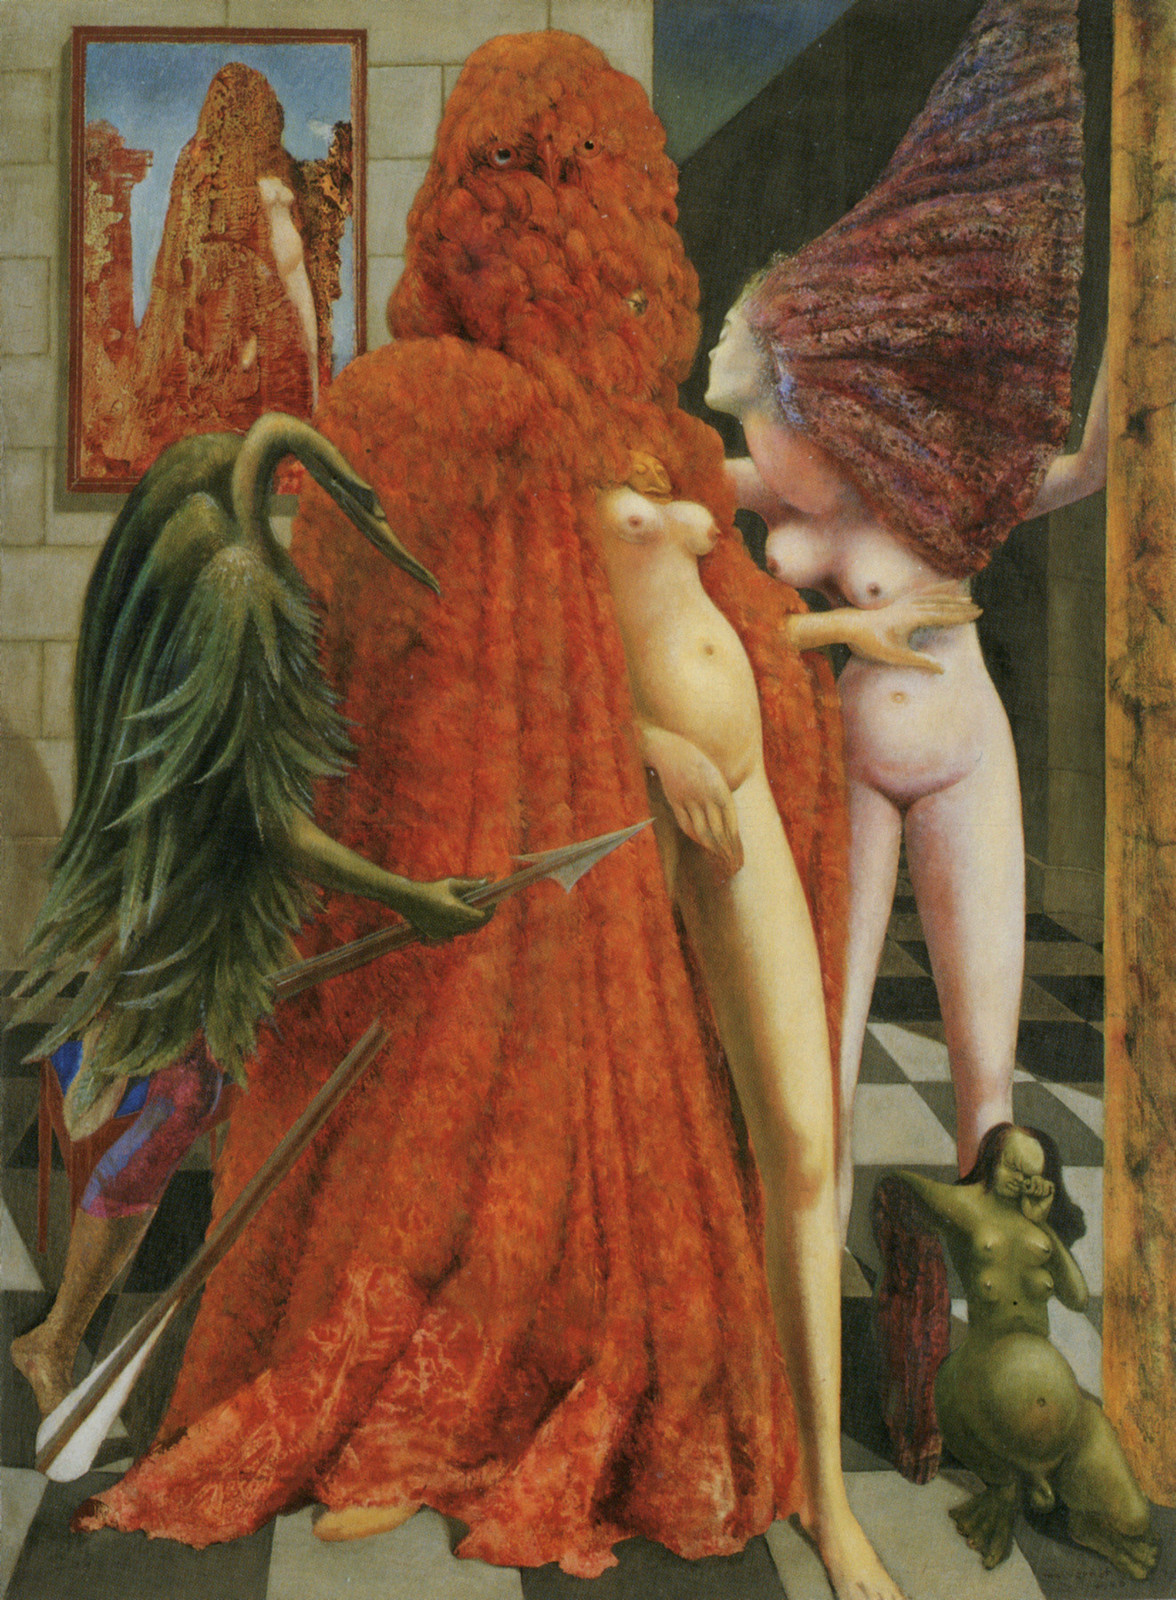 Max Ernst. The Robing of the Bride. 1940. Oil on canvas. 129.5 х 96.2 cm. Peggy Guggenheim Collection (Venice, Italy).